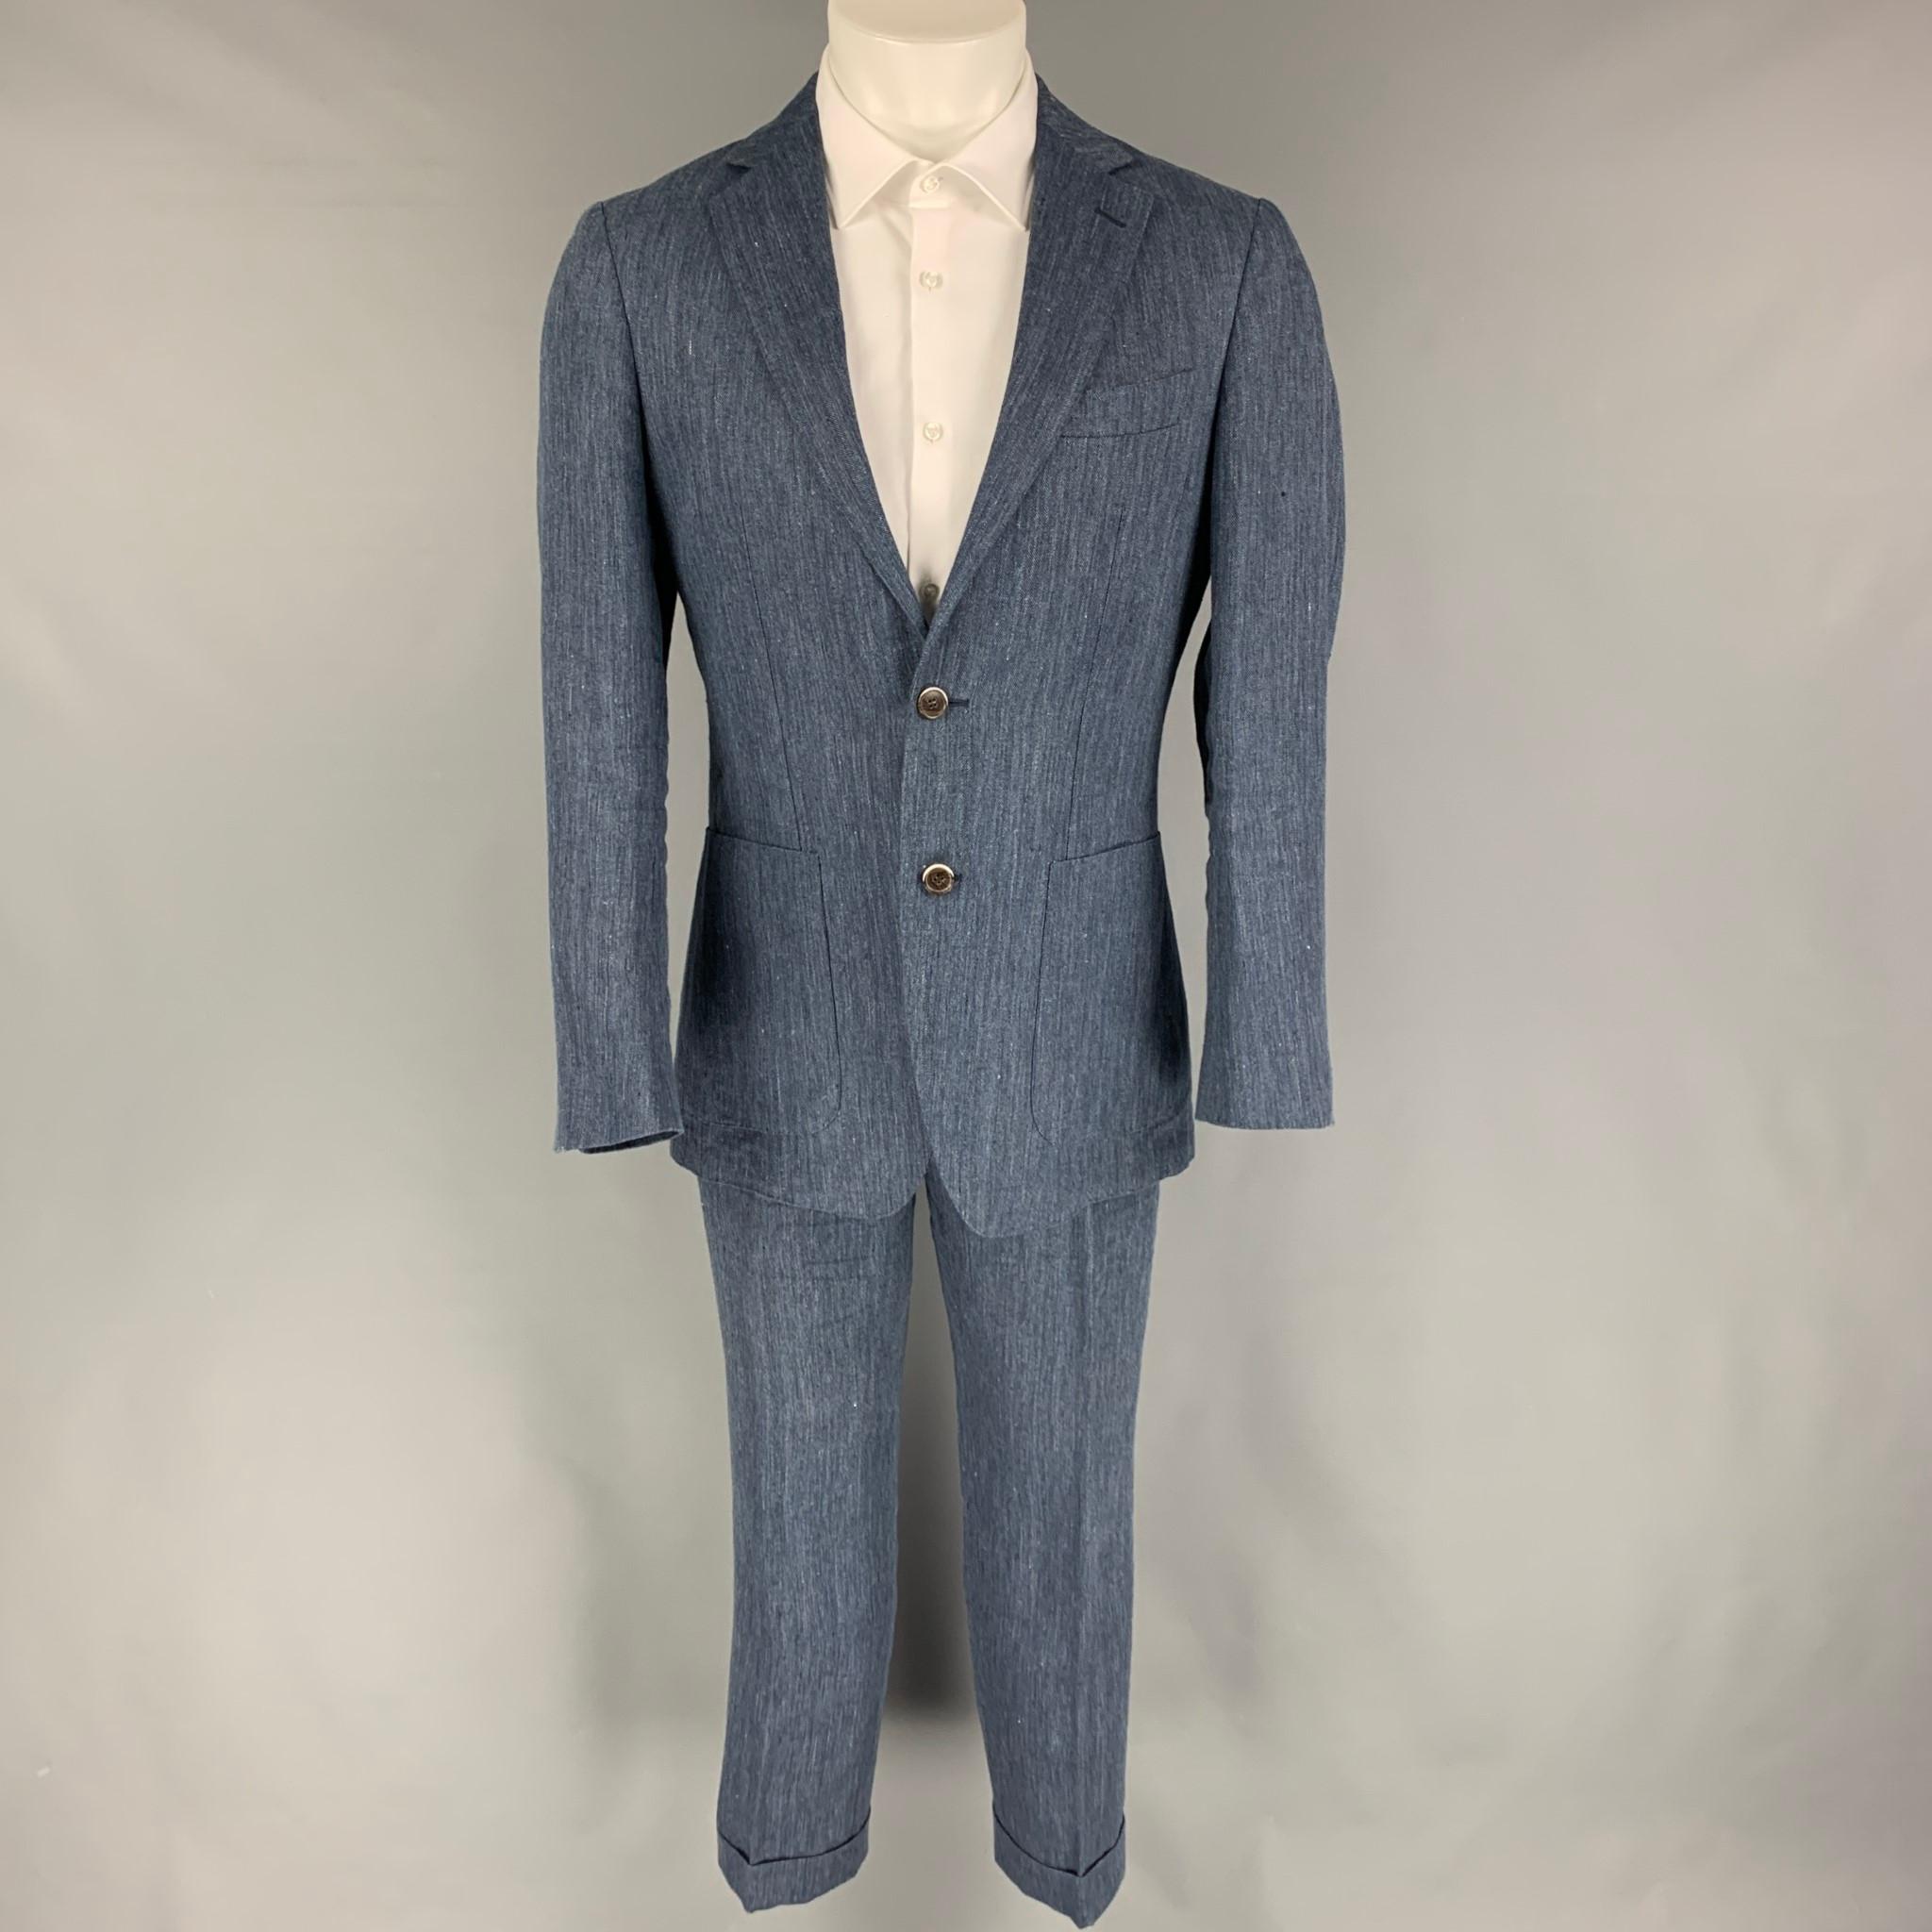 SUIT SUPPLY suit comes in a blue herringbone linen with half liner and includes a single breasted, double button sport coat with notch lapel and matching flat front trousers.

Very Good Pre-Owned Condition.
Marked: